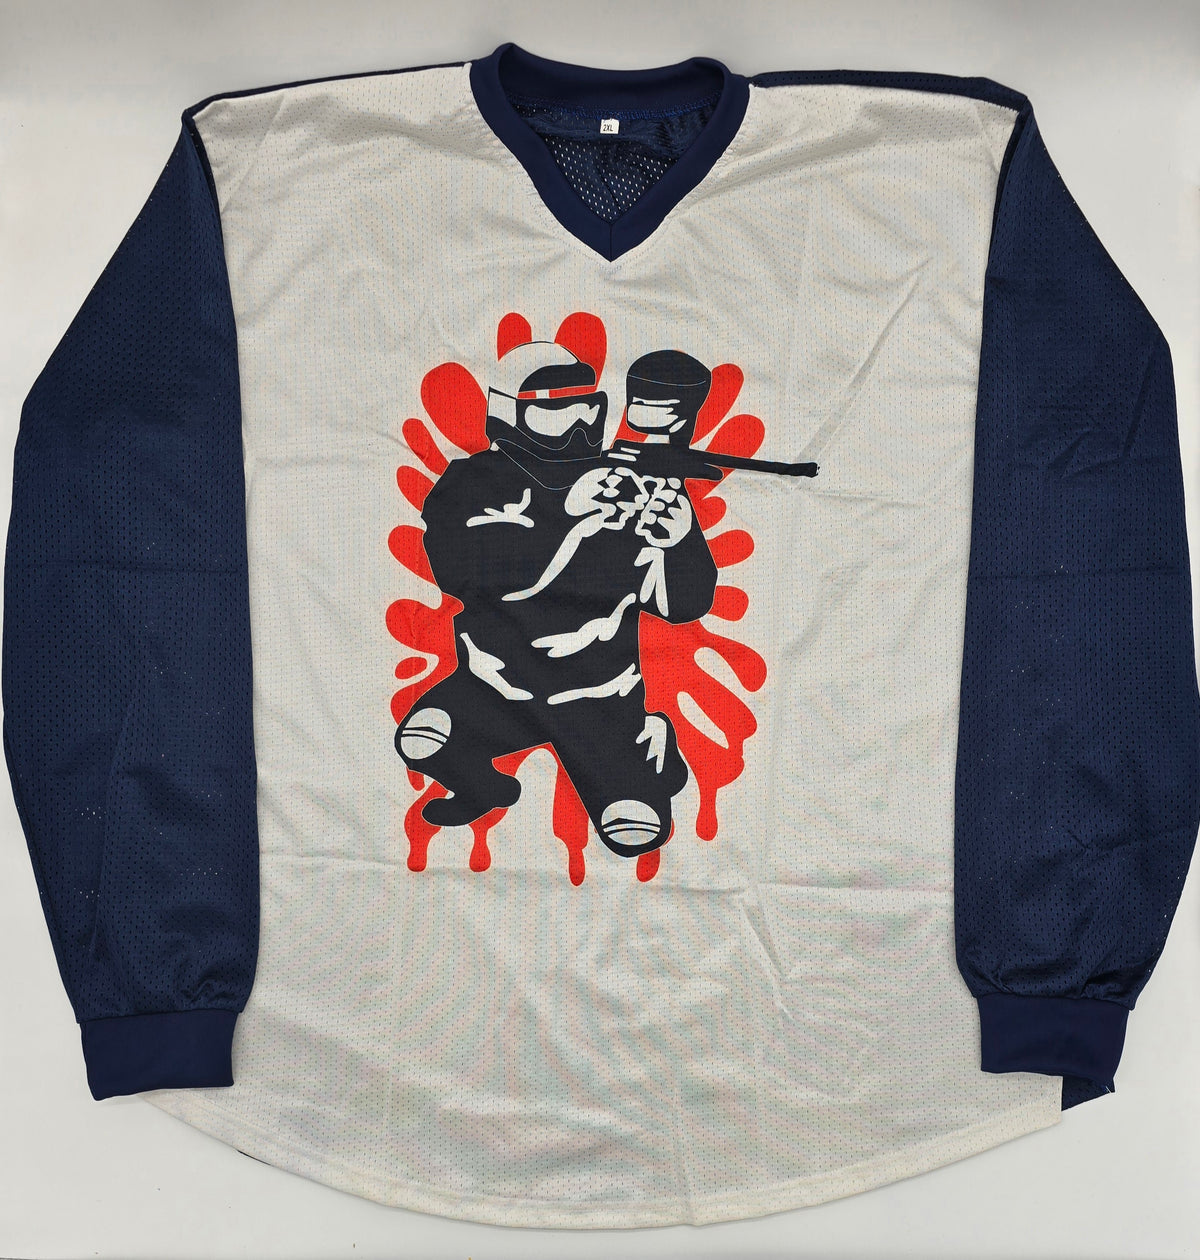 Navy Blue & White red splat dude | Paintball Practice Jersey